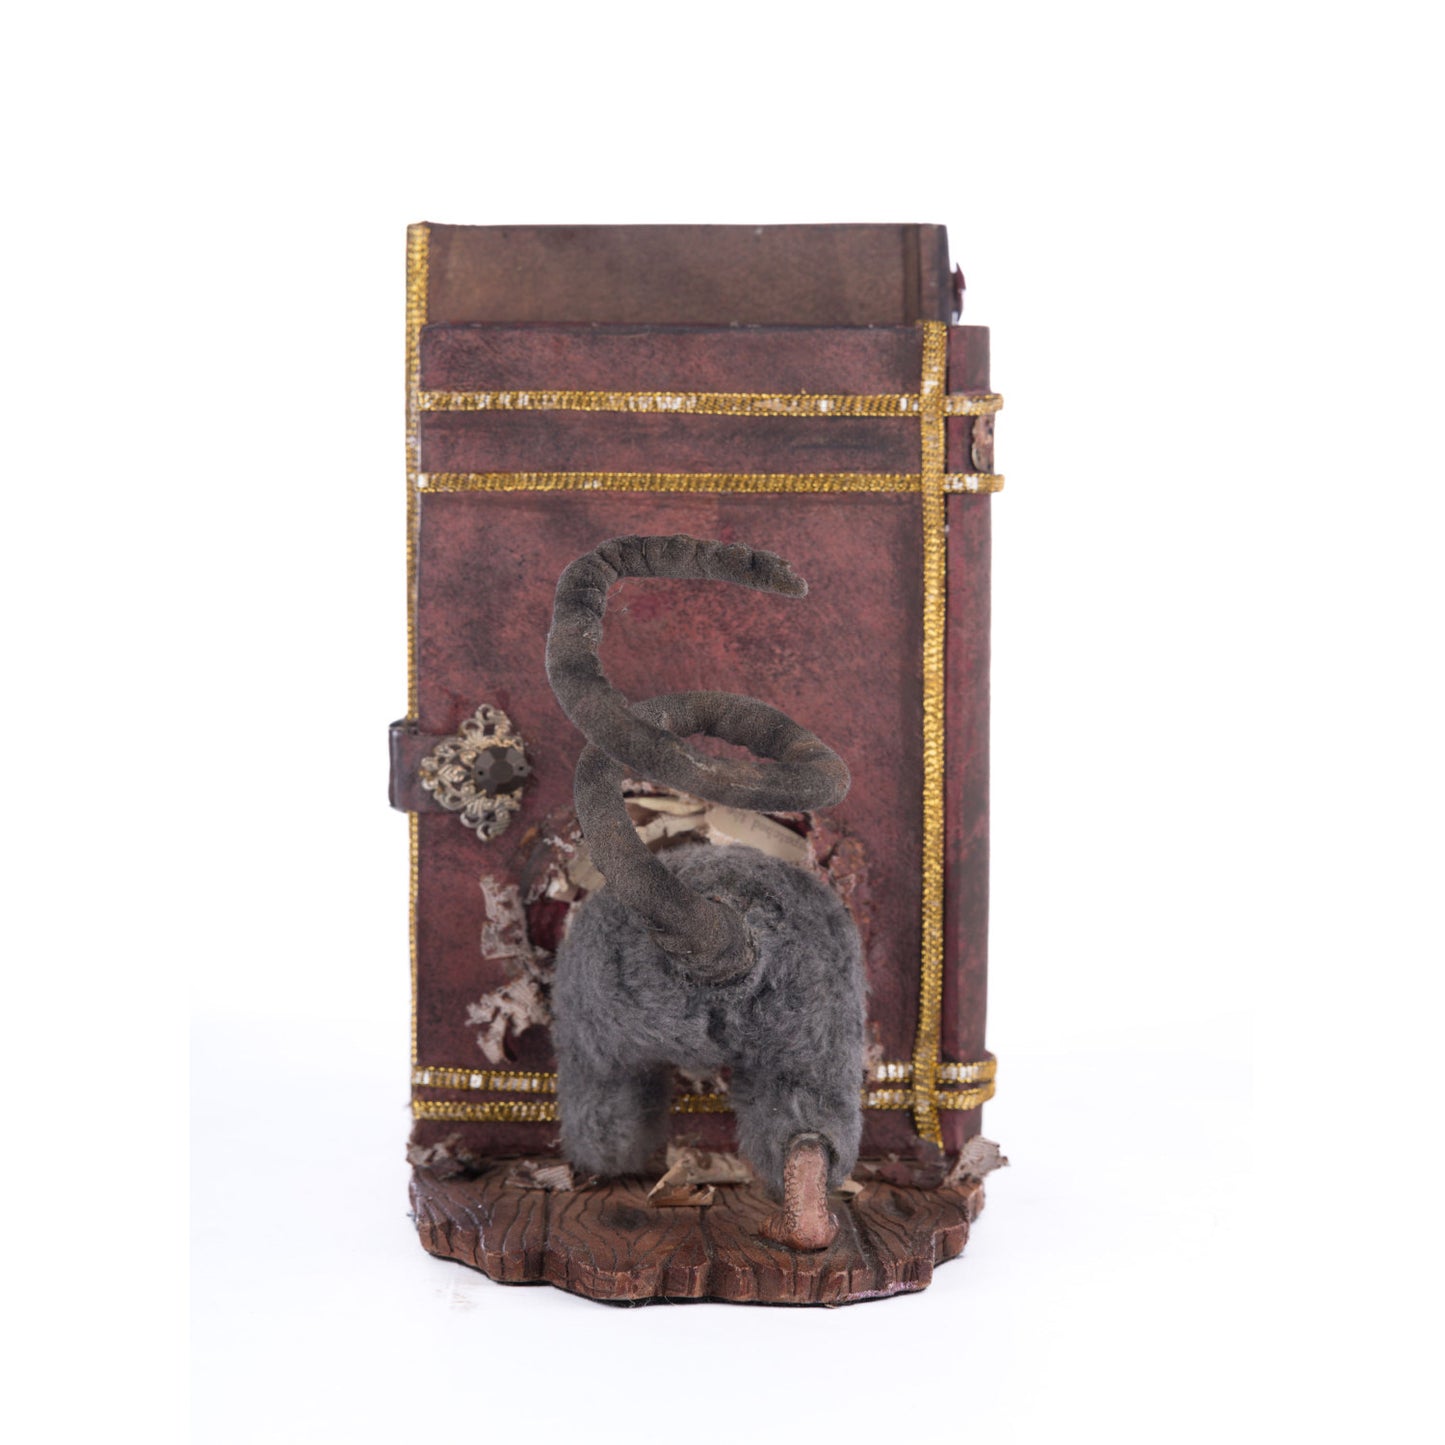 Broomstick Acres 2024 Moonspell Mouse Bookends Set Of 2, 9.25-Inch Table Top